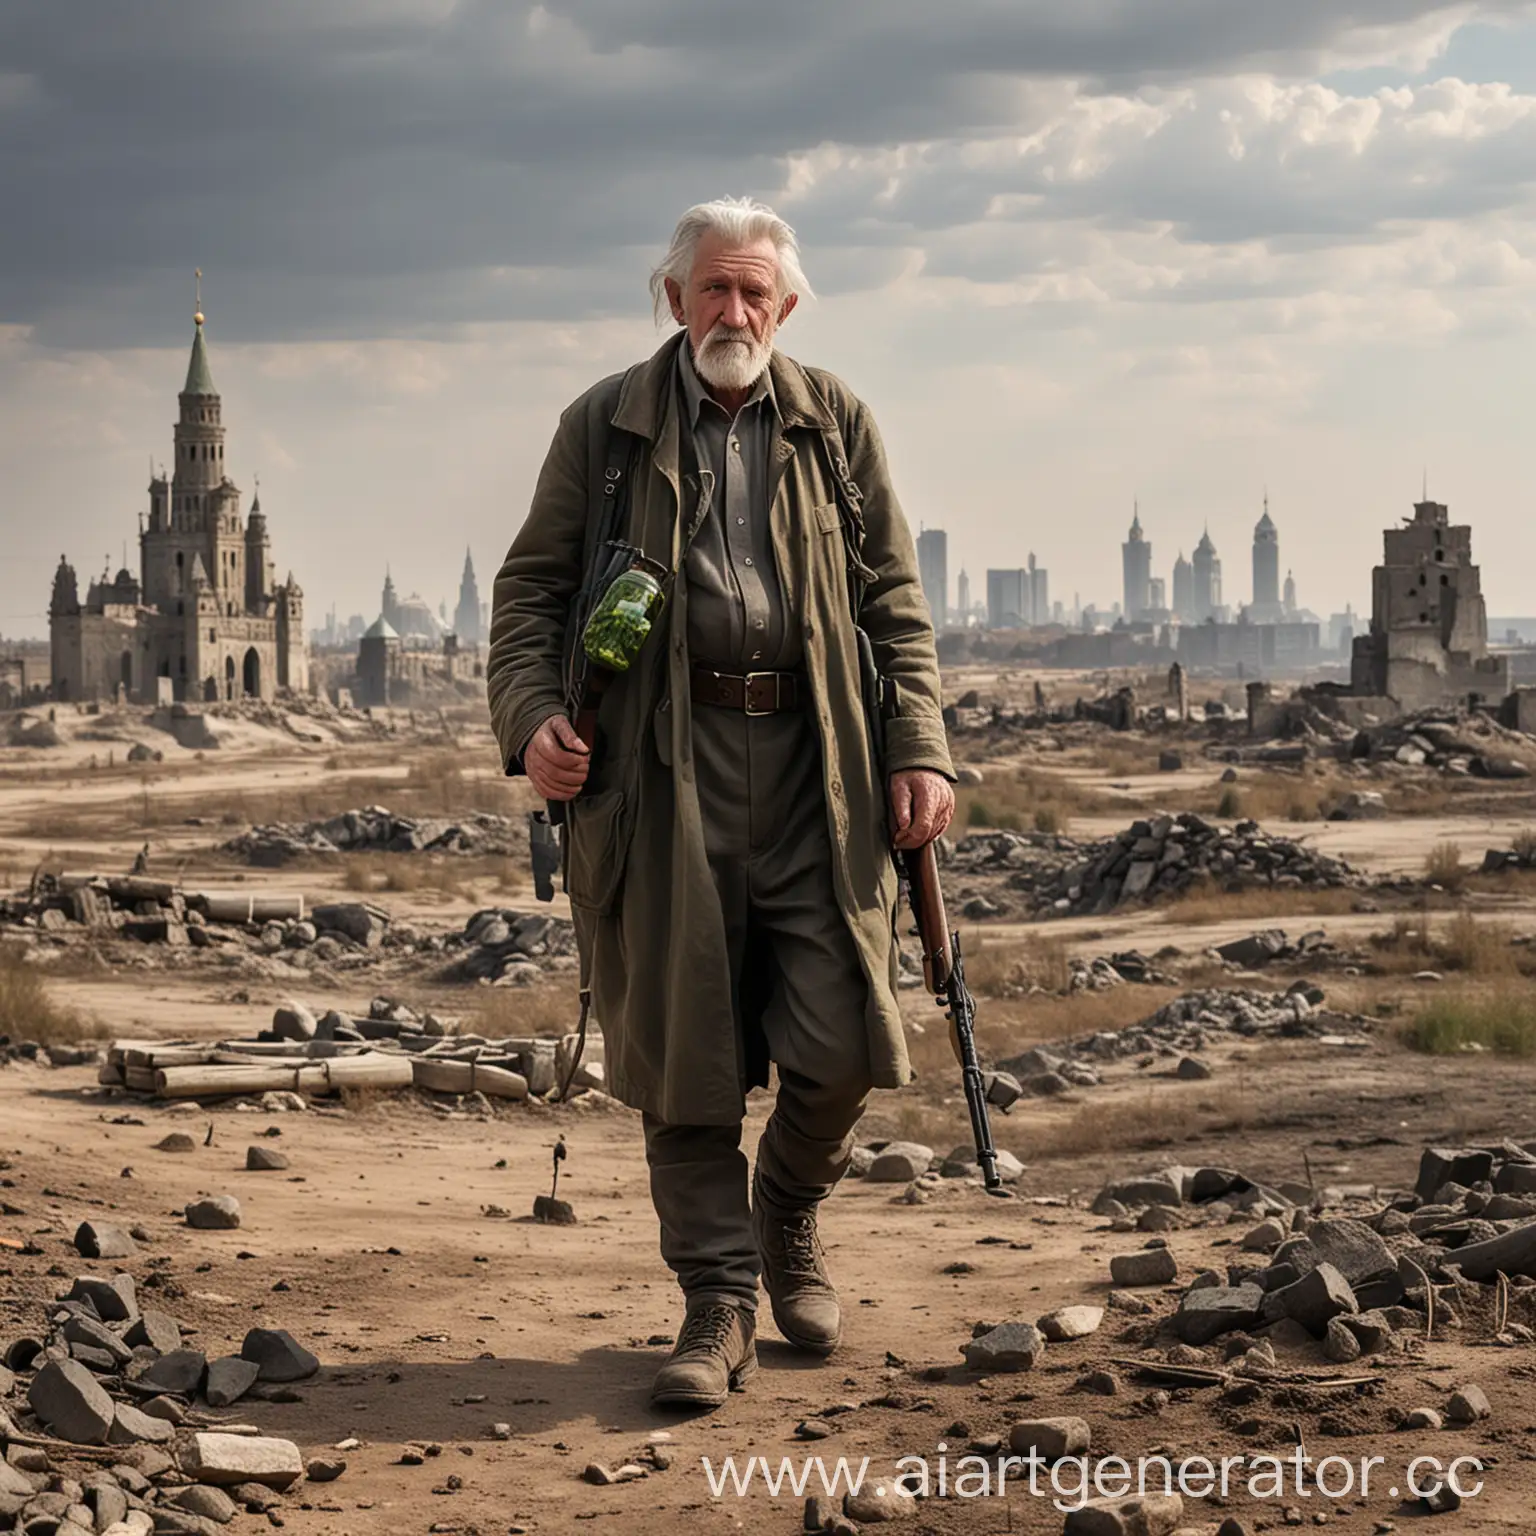 Elderly-Man-with-Rifle-and-Pickled-Cucumbers-Roaming-Desert-Near-Moscow-Ruins